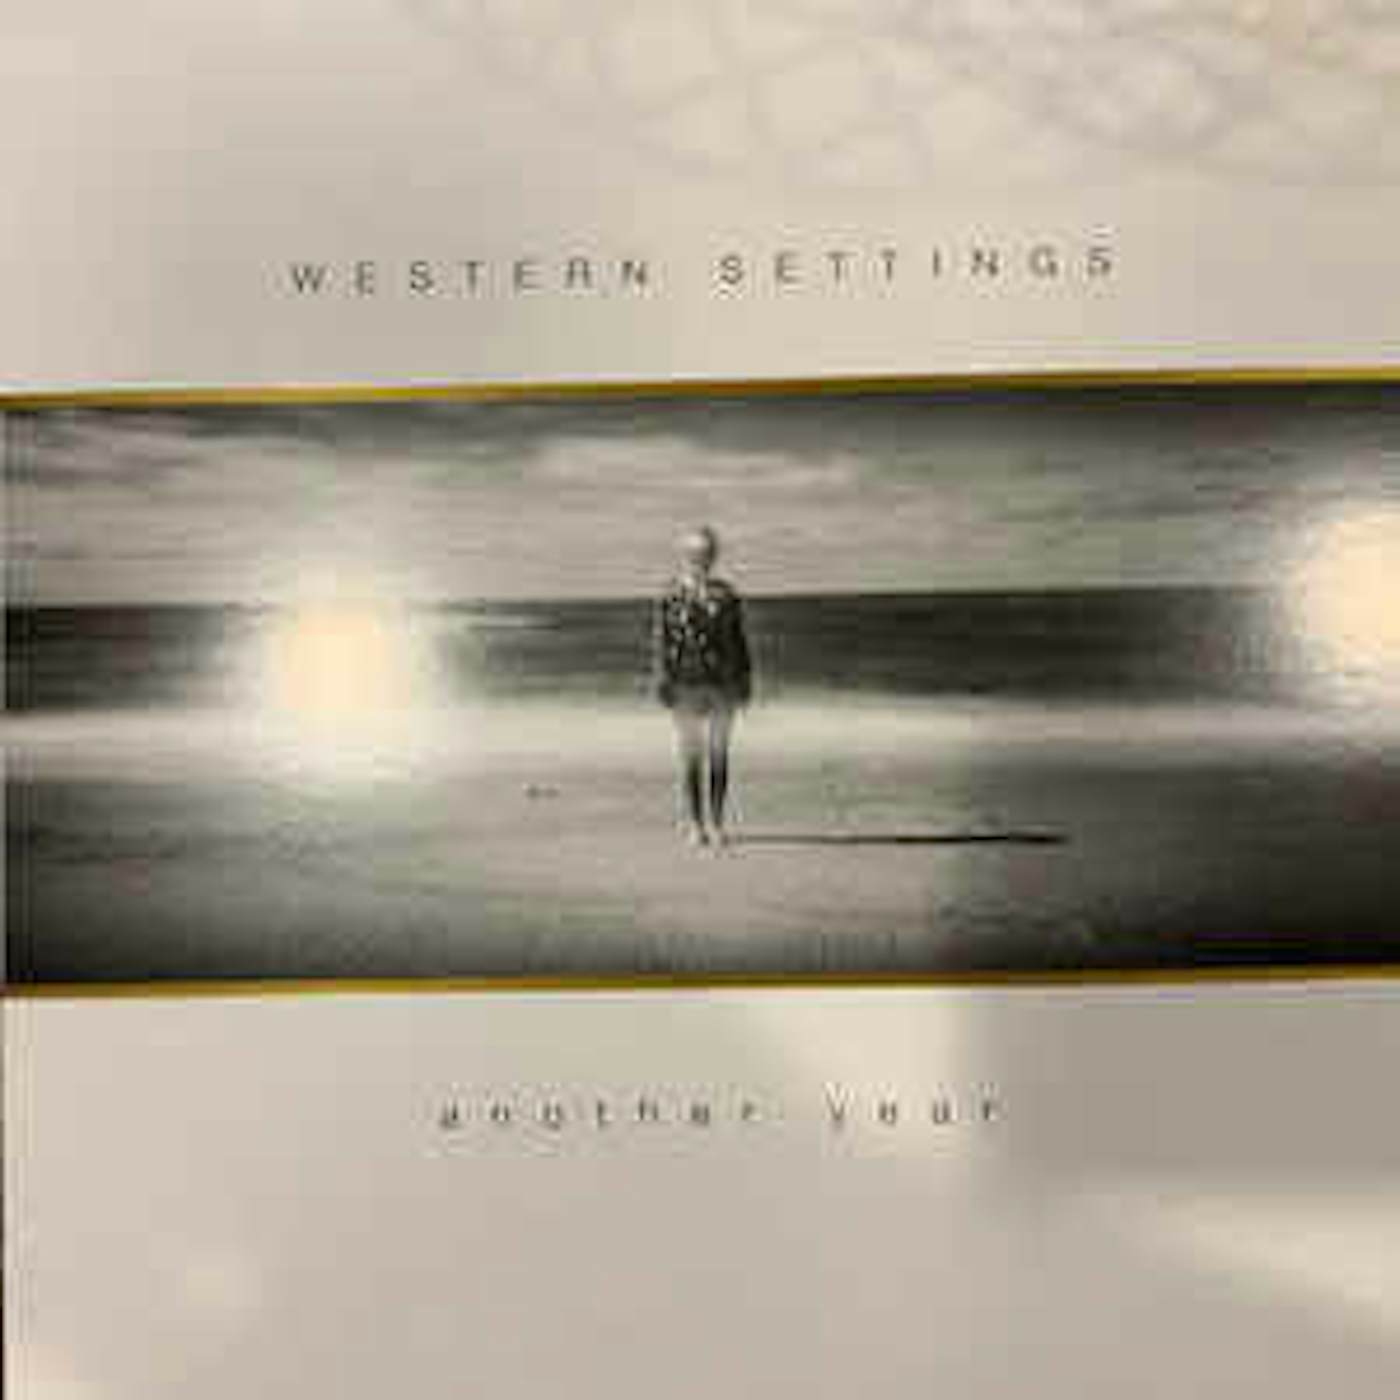 Western Settings ANOTHER YEAR (GOLD VINYL) Vinyl Record